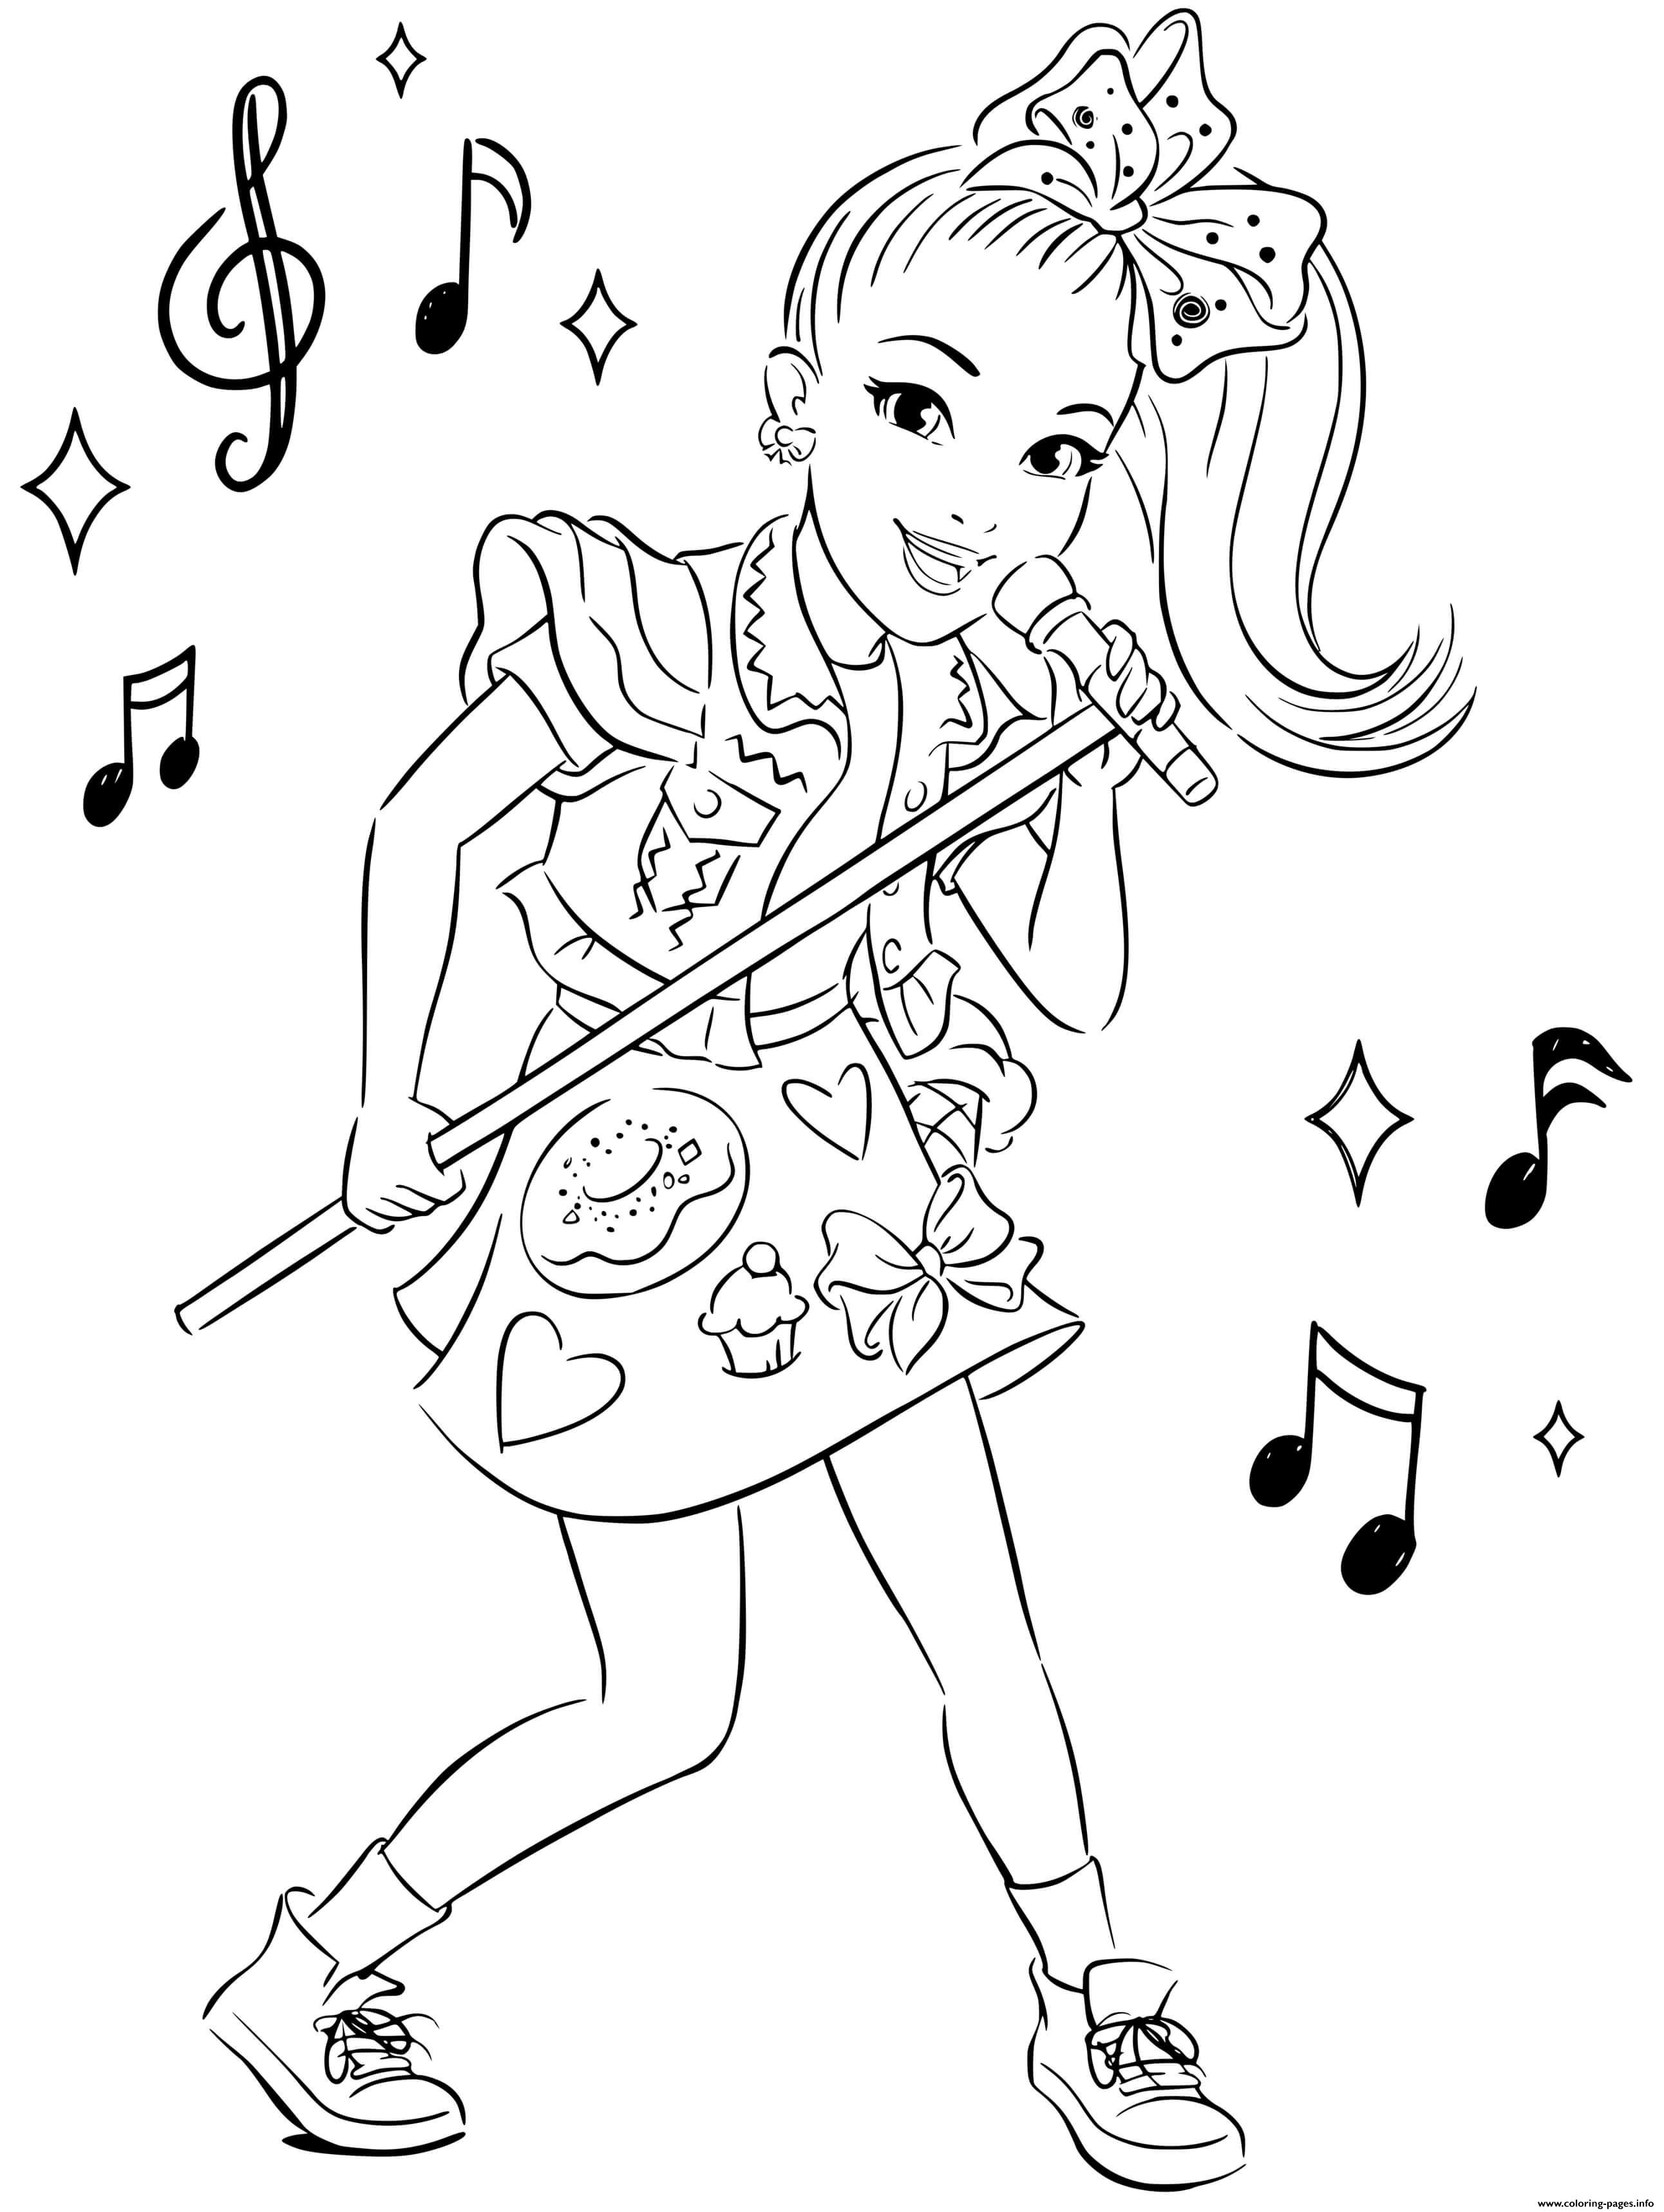 JoJo Siwa Star Sparly Outfits 1 coloring